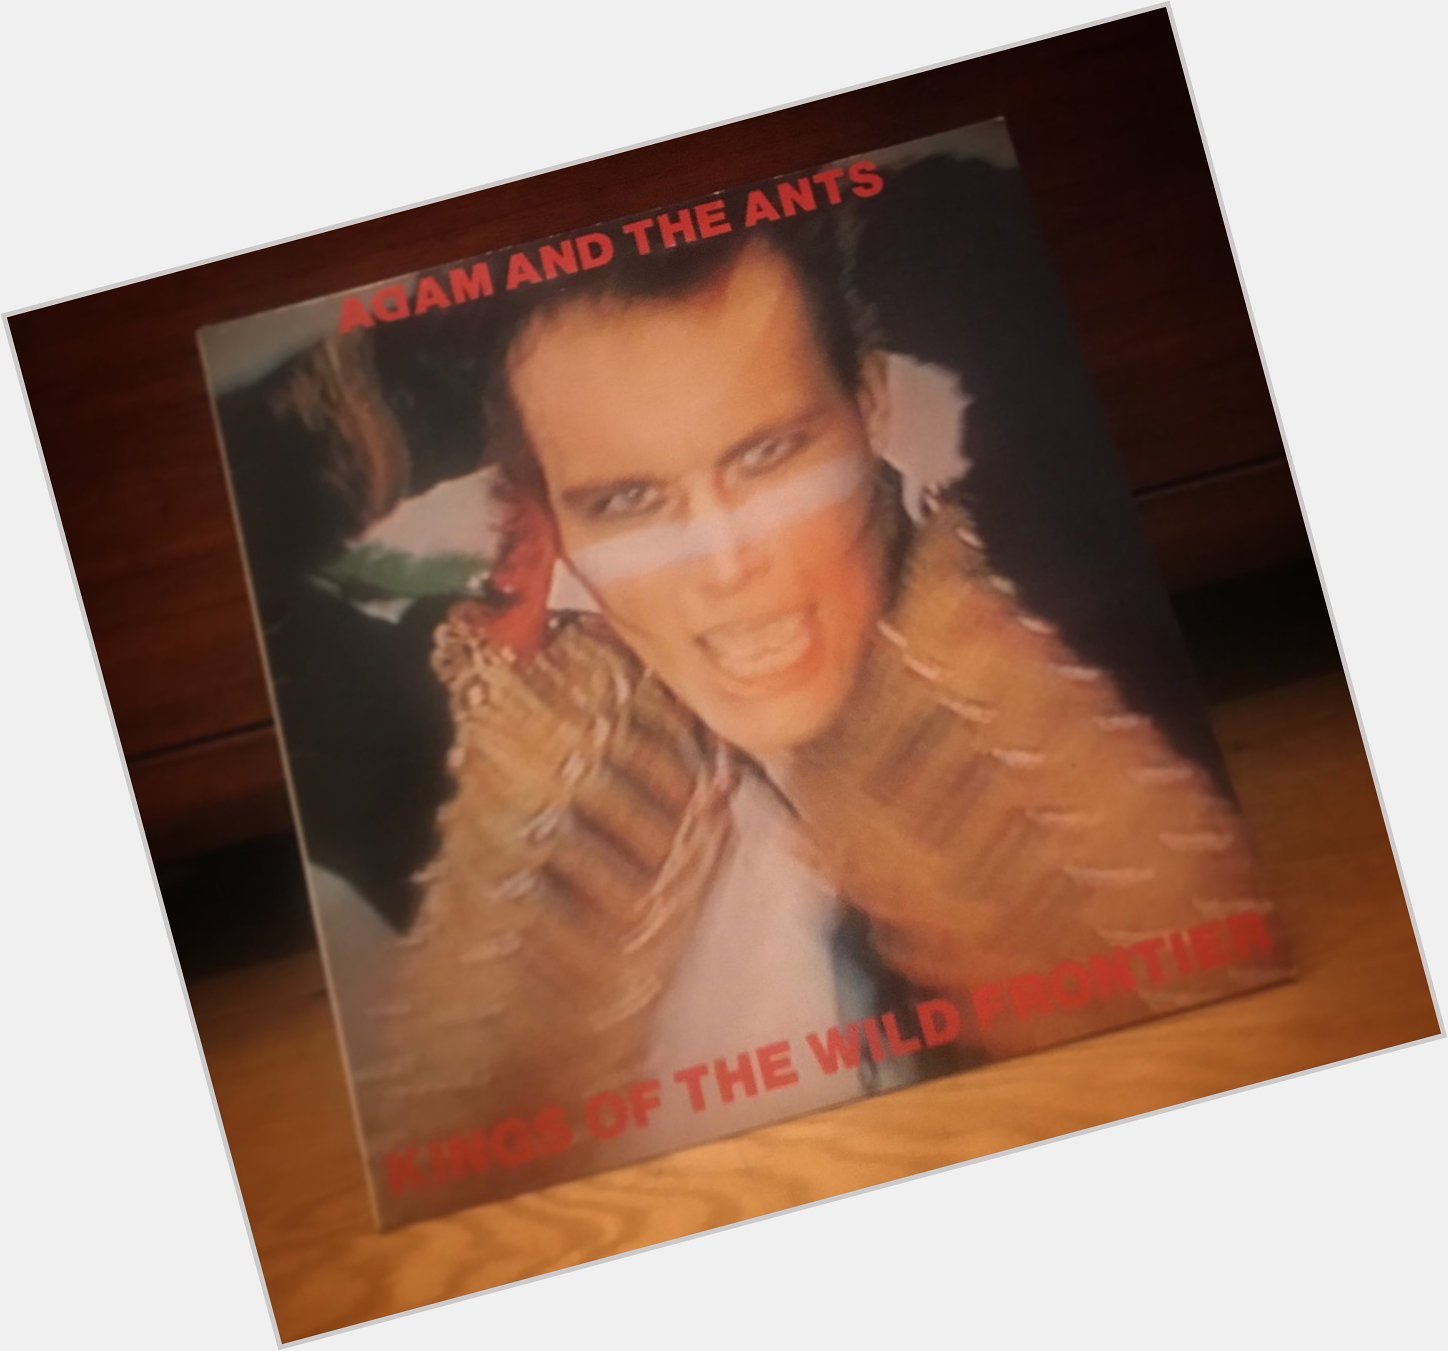 And it ain t been a day too long... Released 40 years ago today. Still sounds brilliant. Happy Birthday, Adam Ant. 